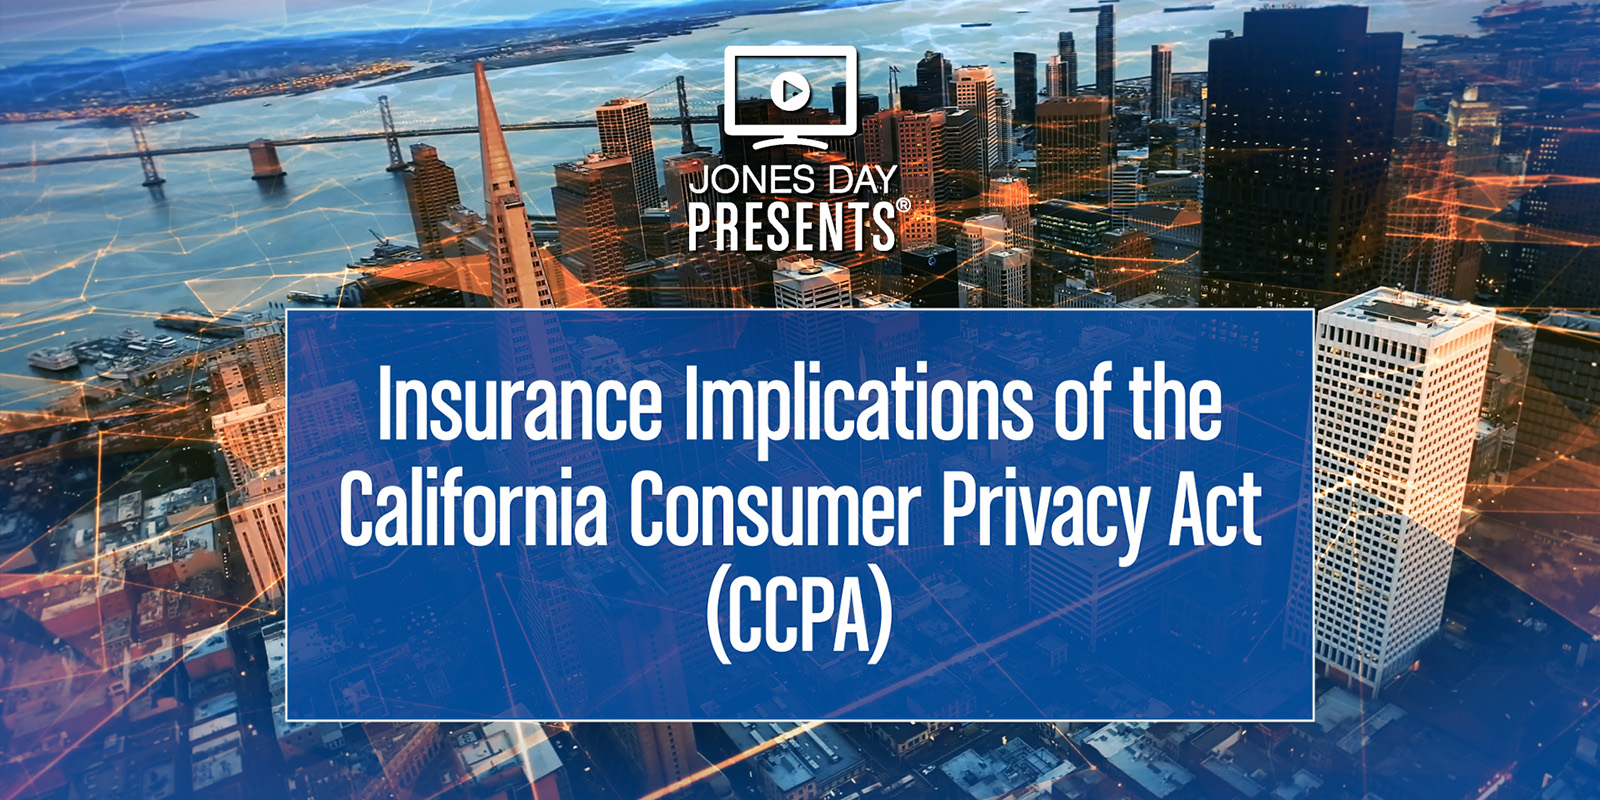 Insurance Implications of the CCPA